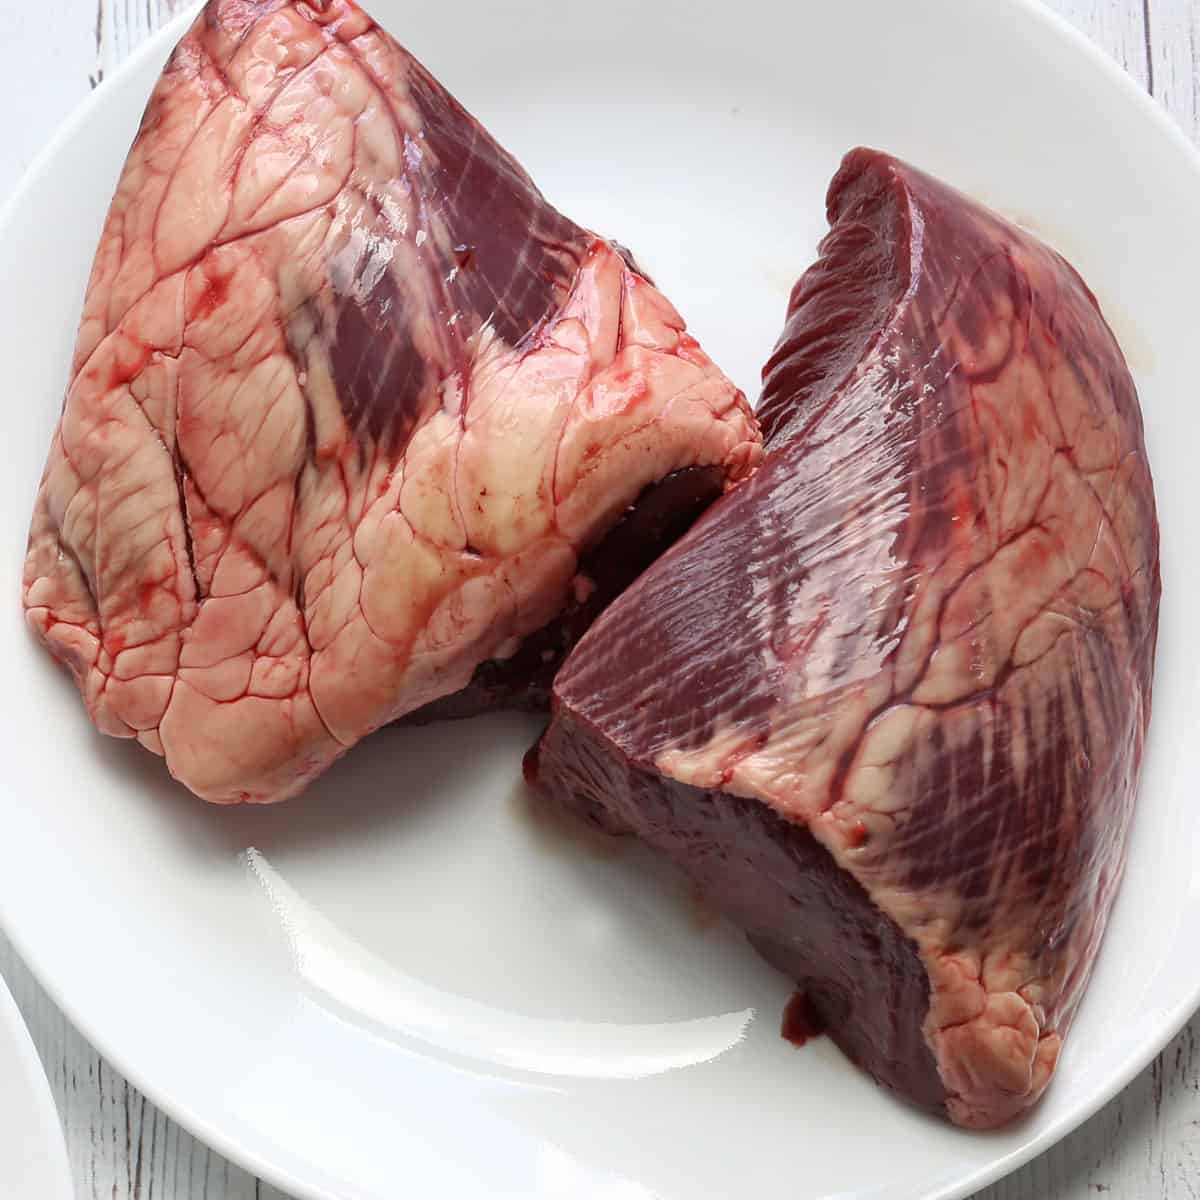 Two raw beef heart halves. One of them has a visible fat layer.